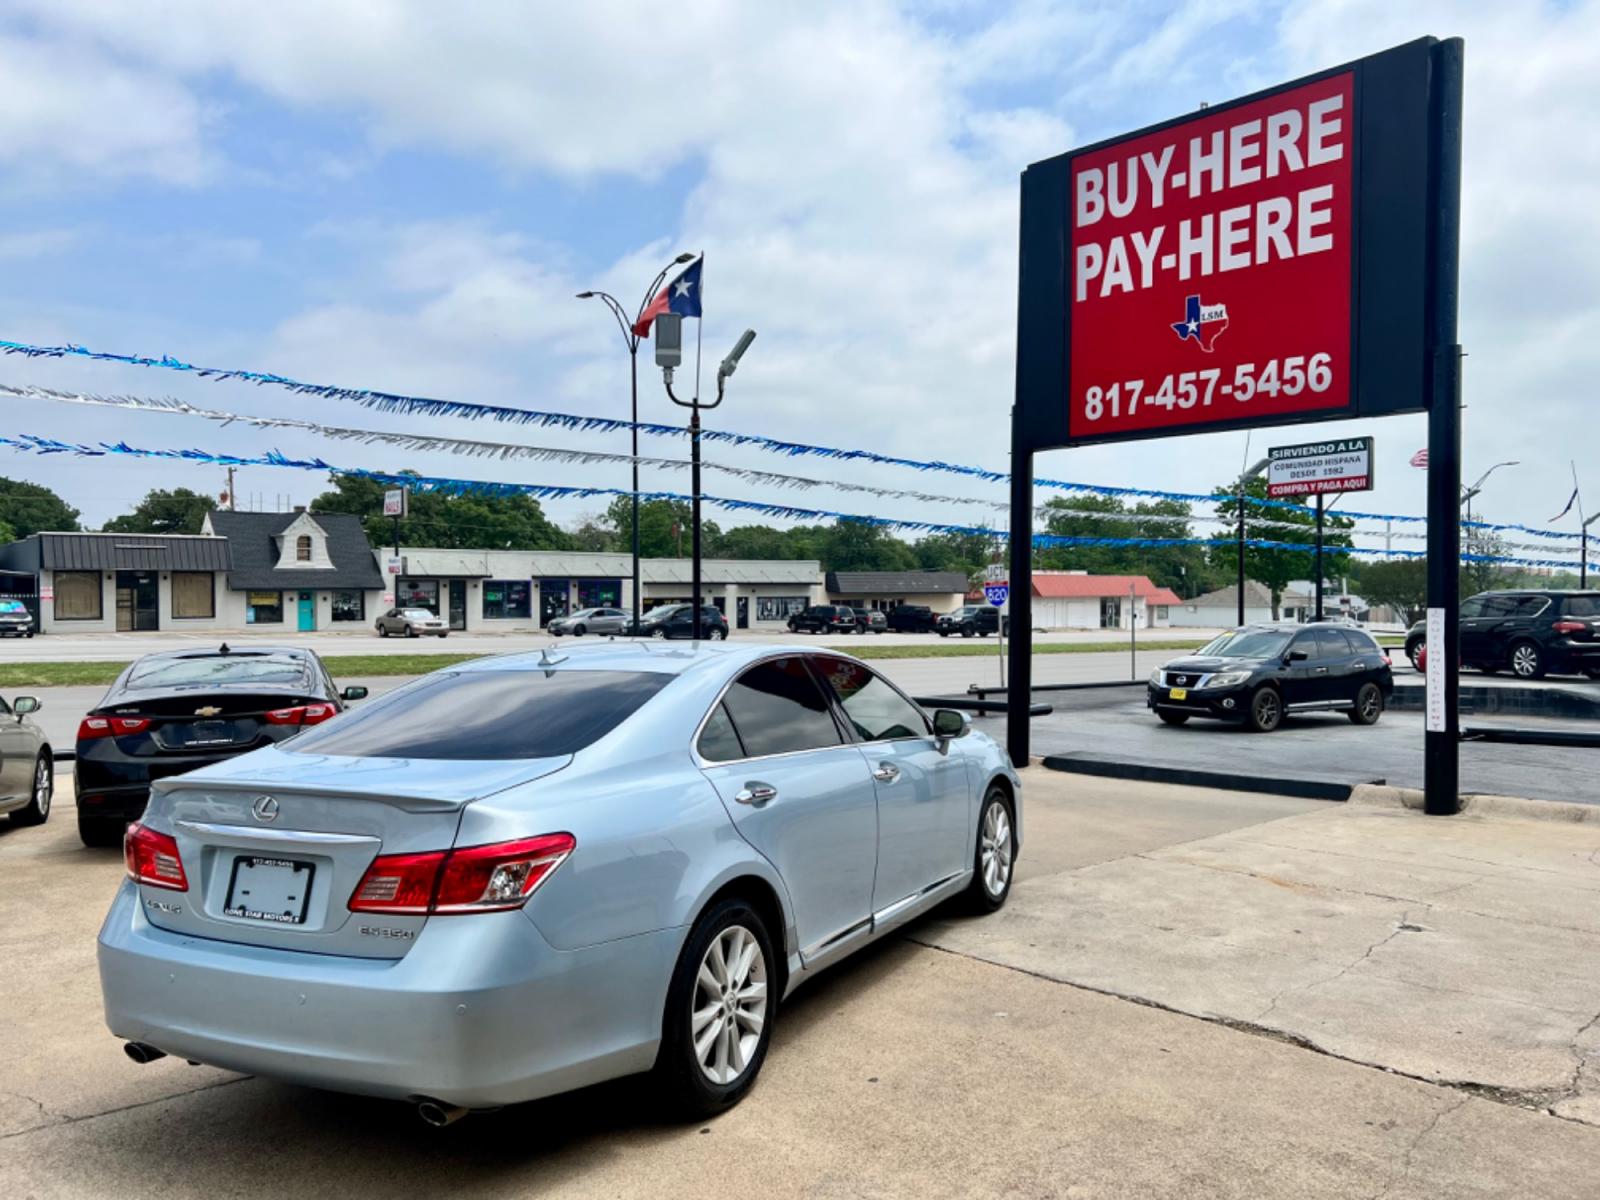 2010 BLUE /Tan LEXUS ES 350 BASE Base 4dr Sedan (JTHBK1EG3A2) with an 3.5L V6 engine, Automatic 6-Speed transmission, located at 5900 E. Lancaster Ave., Fort Worth, TX, 76112, (817) 457-5456, 0.000000, 0.000000 - Cash CASH CAR ONLY, NO FINANCING AVAILABLE. THIS 2010 LEXUS ES 350 BASE 4 DOOR SEDAN RUNS AND DRIVES GREAT. IT IS EQUIPPED WITH A CD PLAYER, AM/FM RADIO AND AN AUX PORT. THE TIRES ARE IN GOOD CONDITION AND STILL HAVE TREAD LEFT ON THEM. THIS CAR WILL NOT LAST SO ACT FAST! Call or text Fran - Photo #6